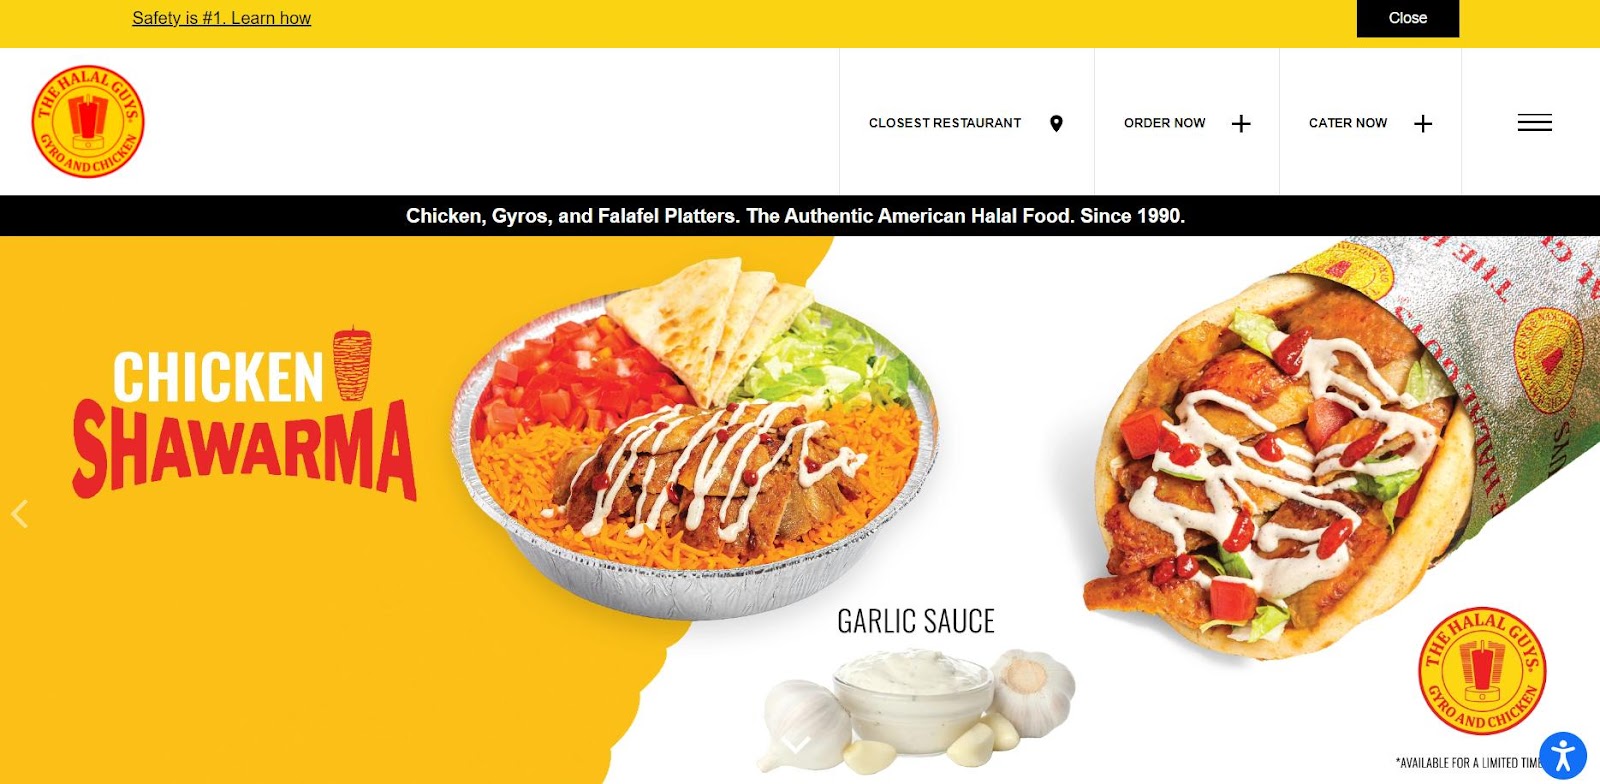 Food truck website design example from the Halal Guys.